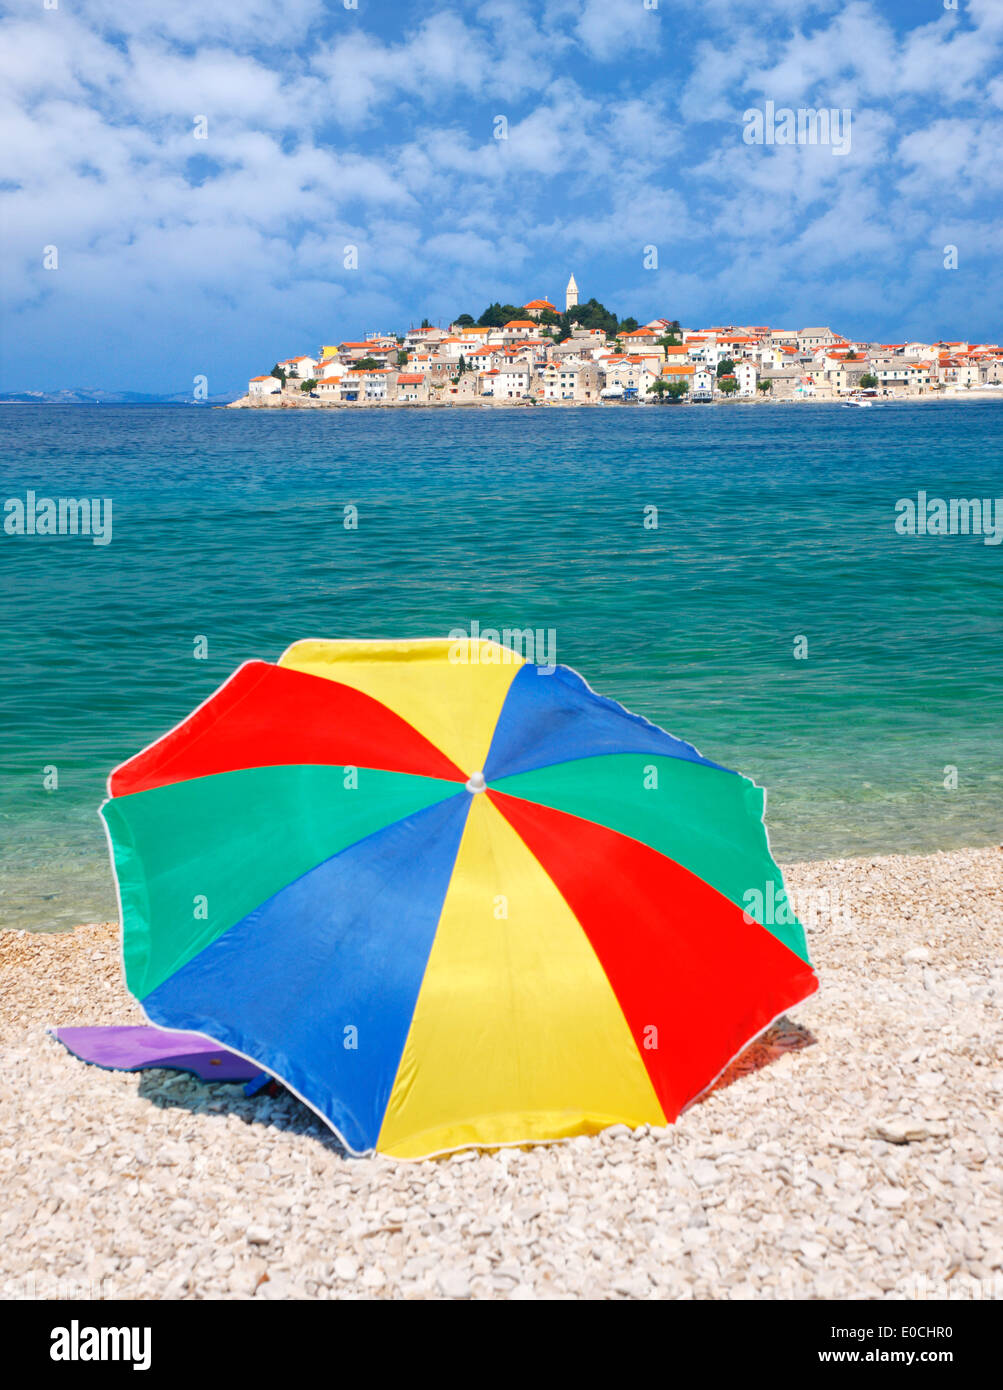 Primosten town, view from the beach, Croatia Stock Photo